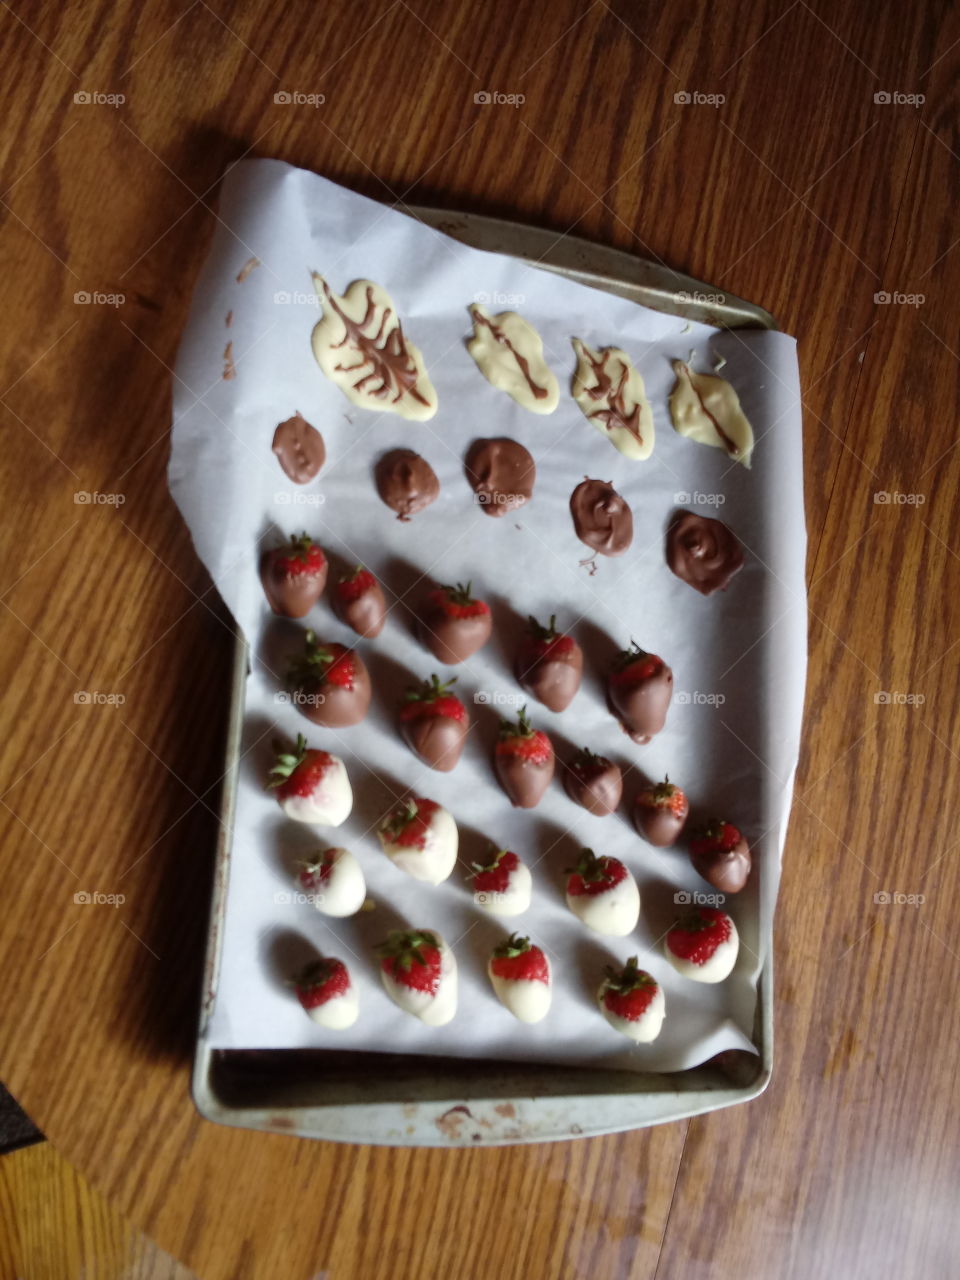 Hand dipped chocolate converted strawberries and chocolate leaves!